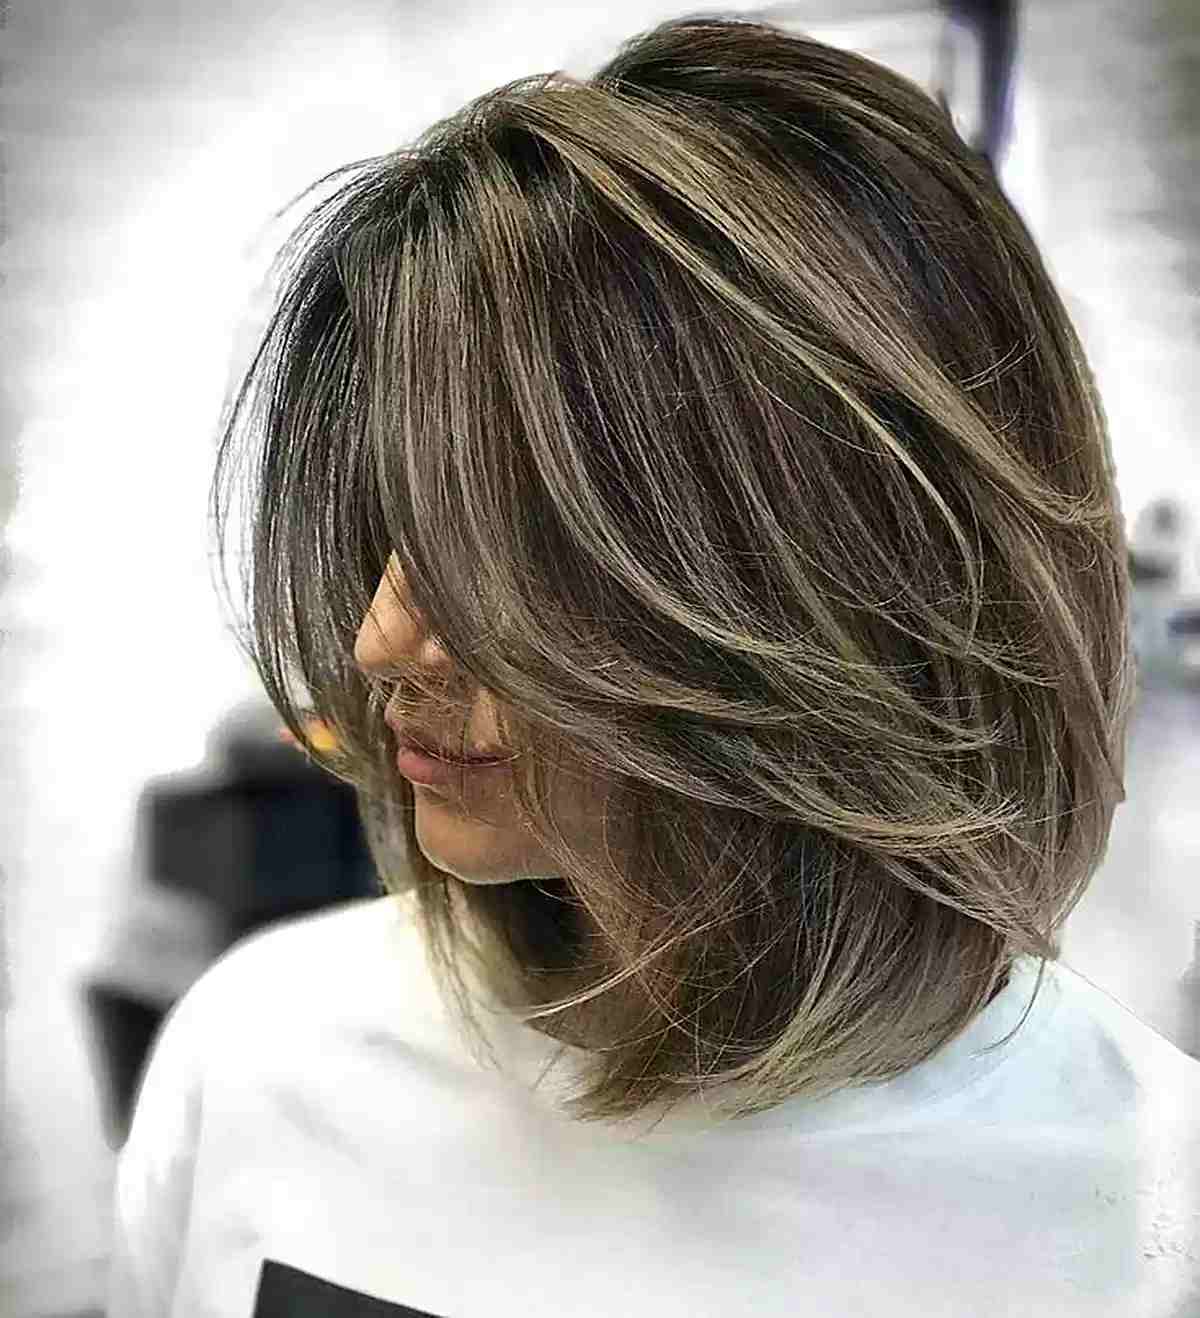 Butterfly Lob Cut with Longer Layers and Blonde Highlights